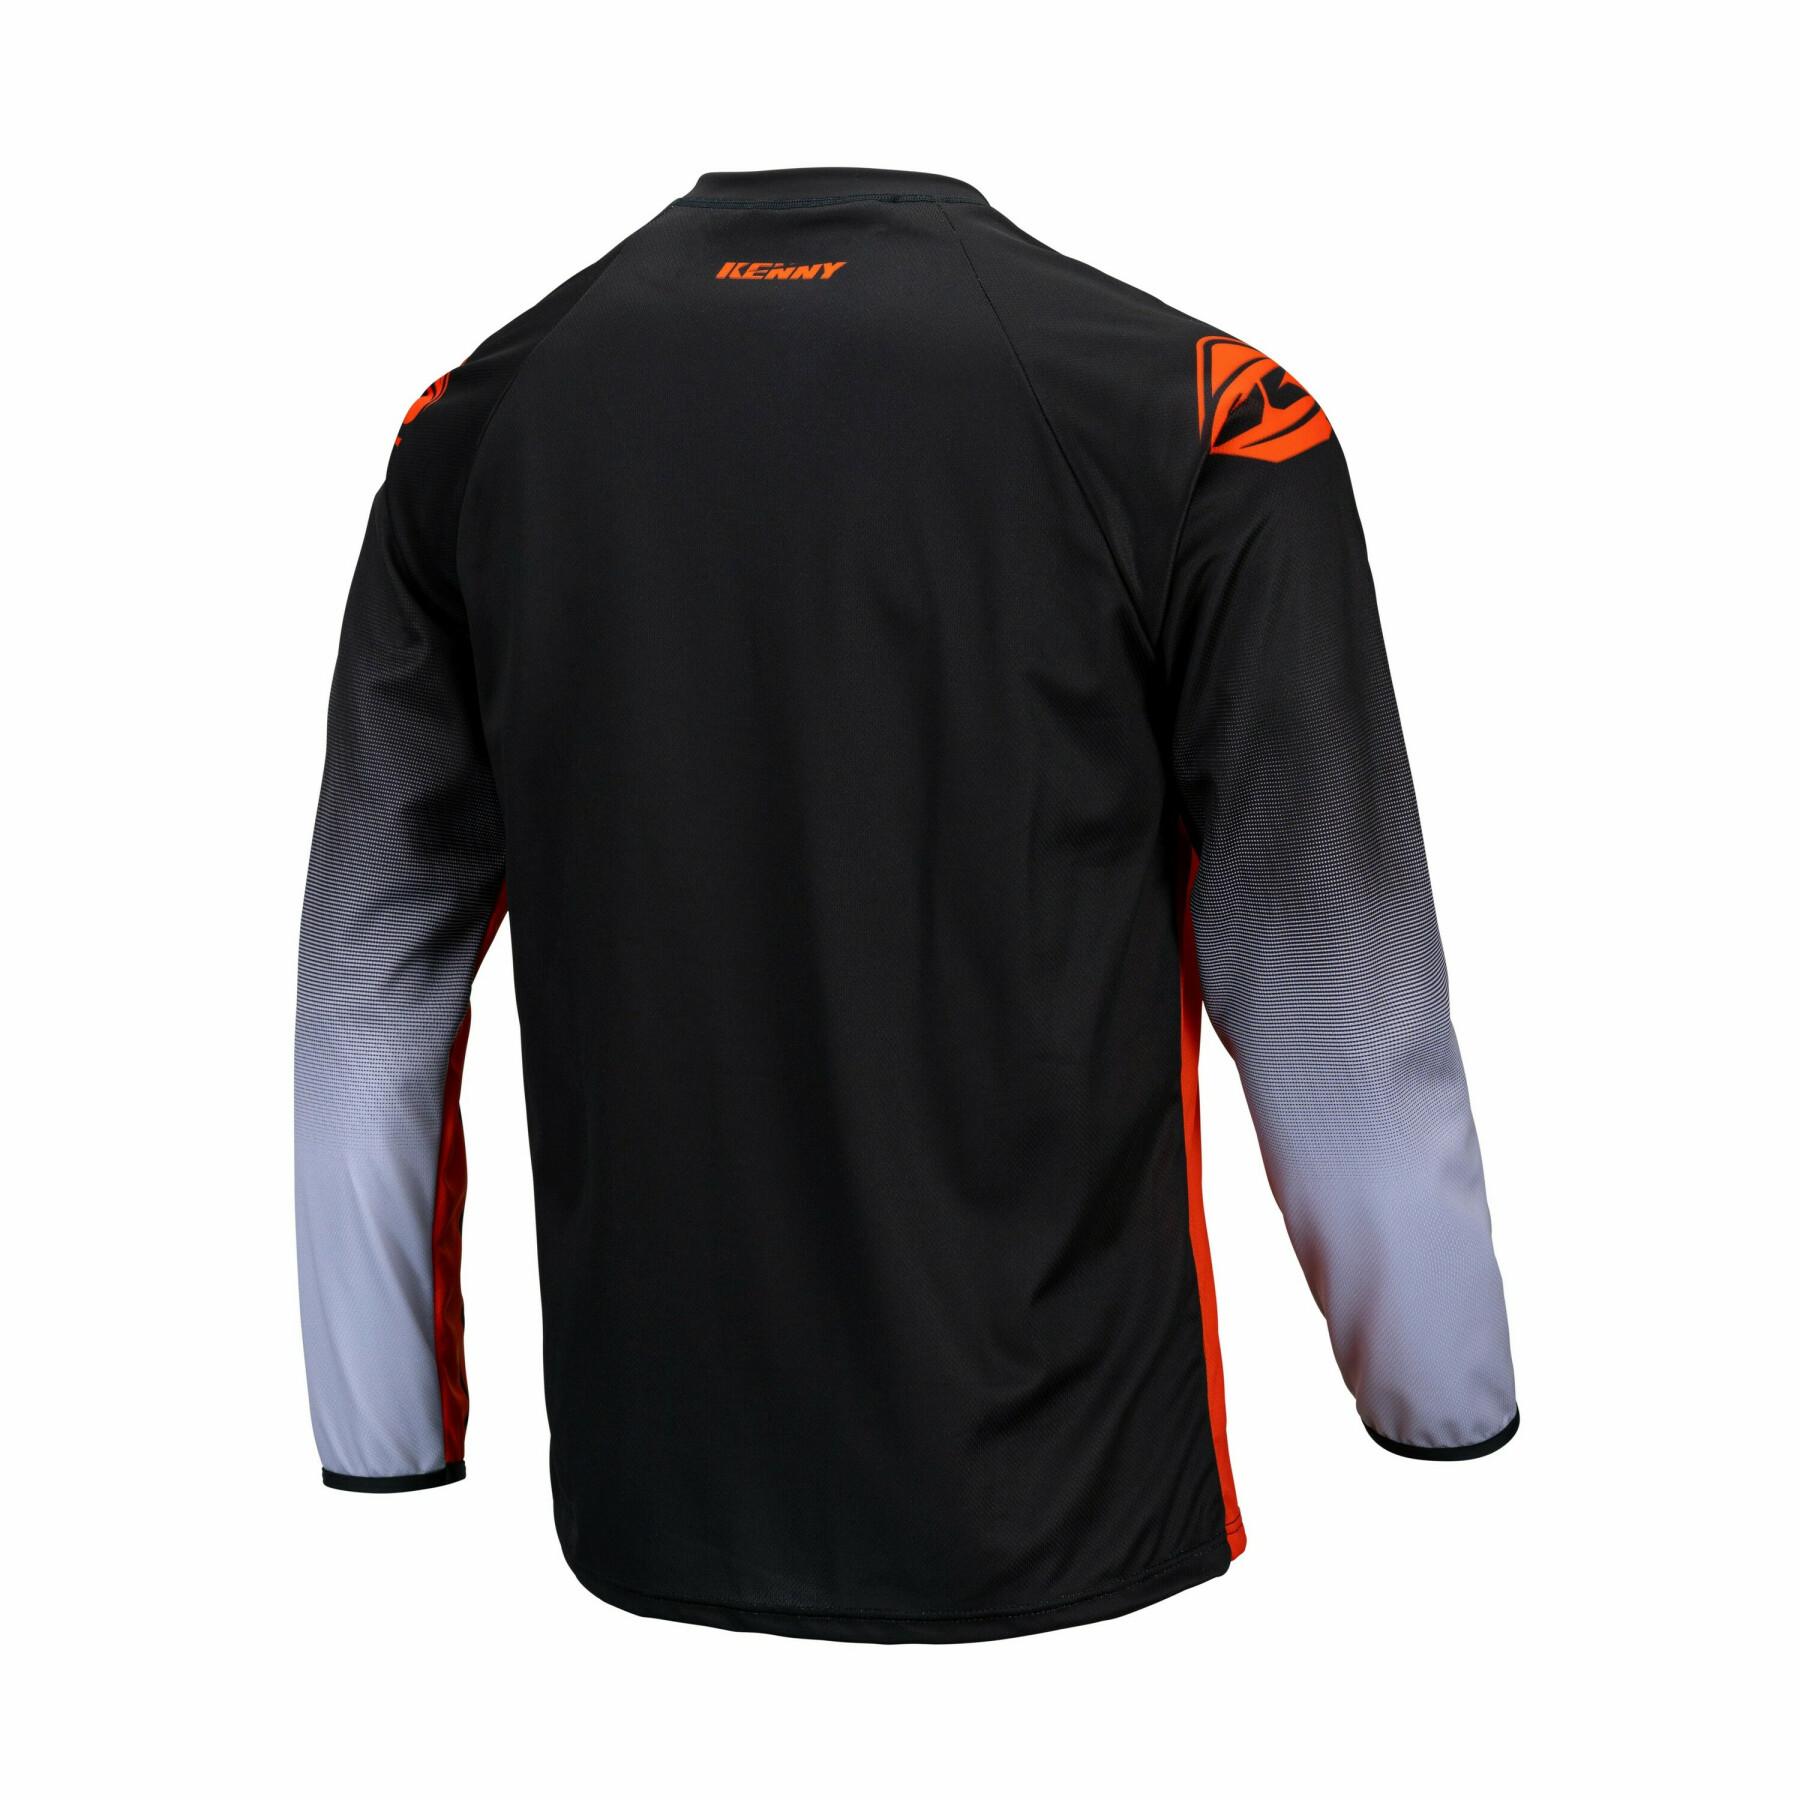 Motorcycle cross jersey Kenny track focus